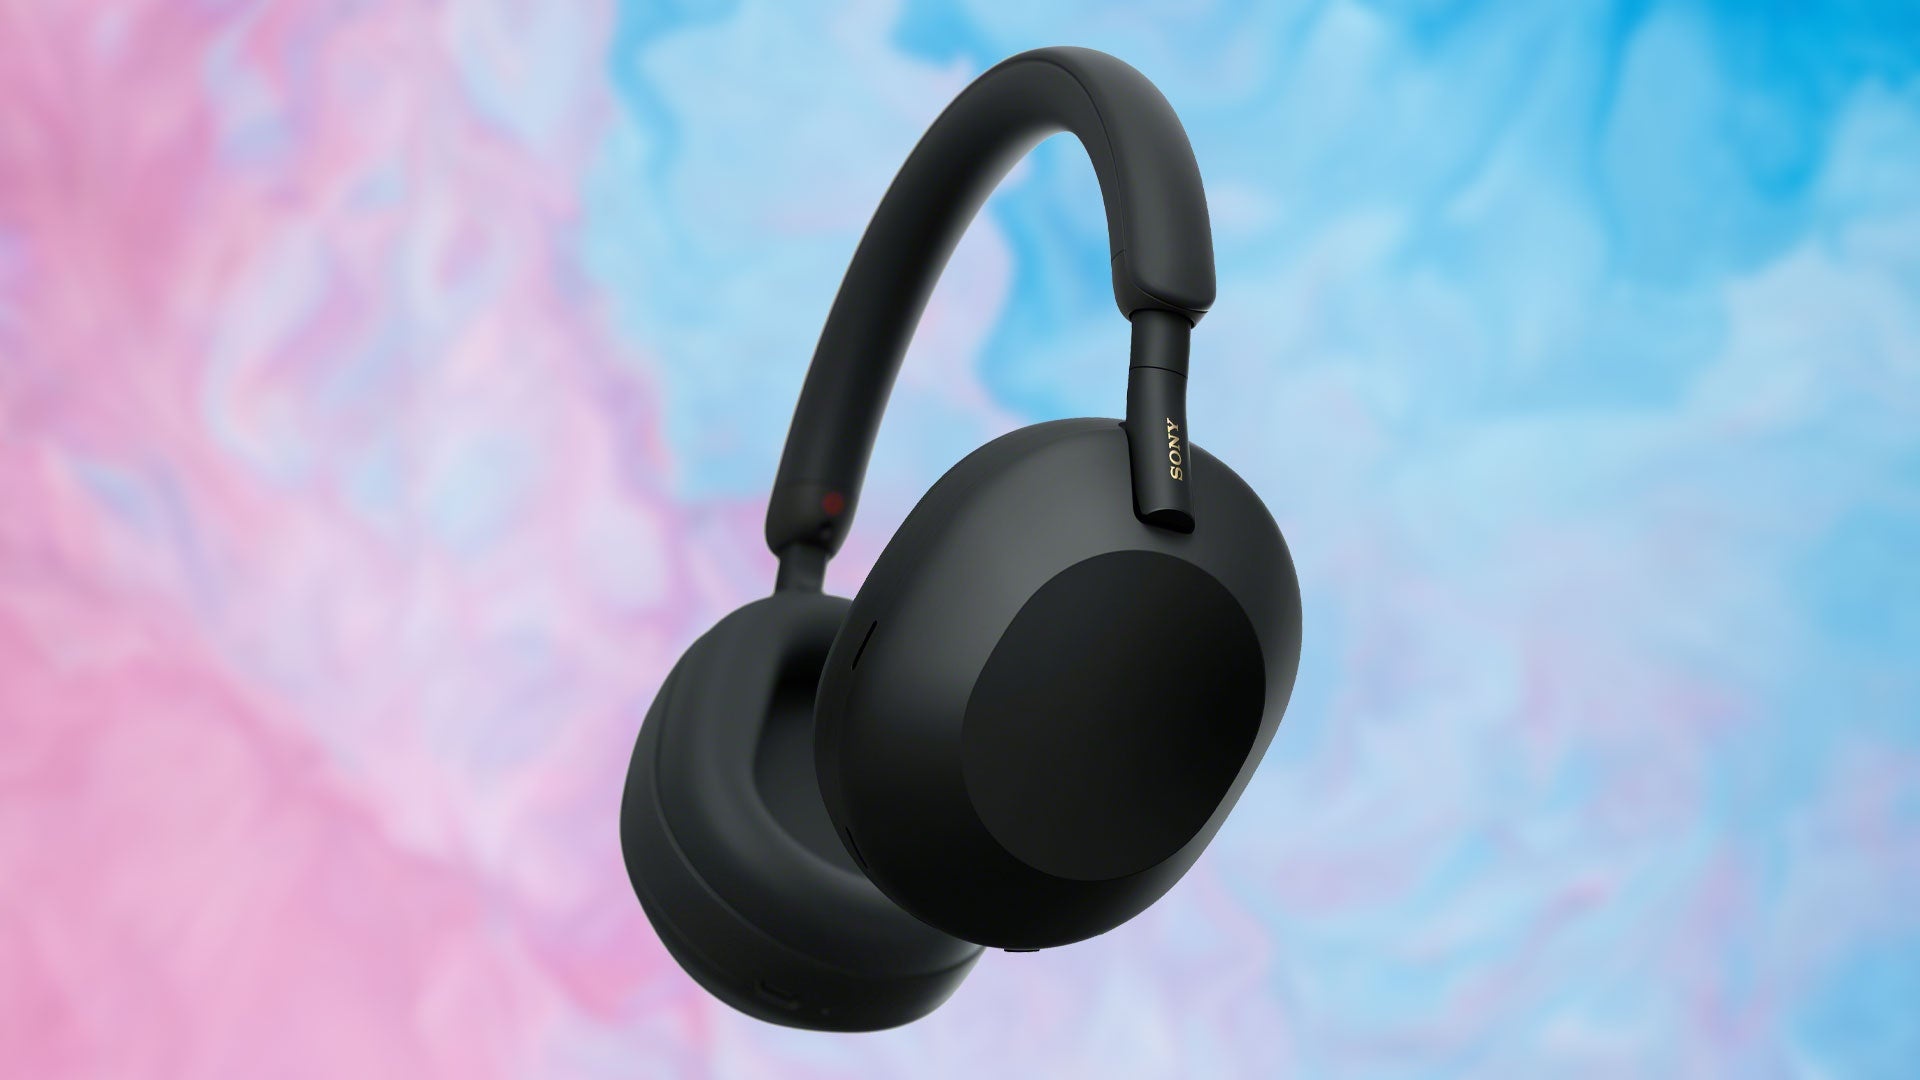 Top wireless headphones, Cutting-edge technology, Superior sound quality, IGN's recommendation, 1920x1080 Full HD Desktop